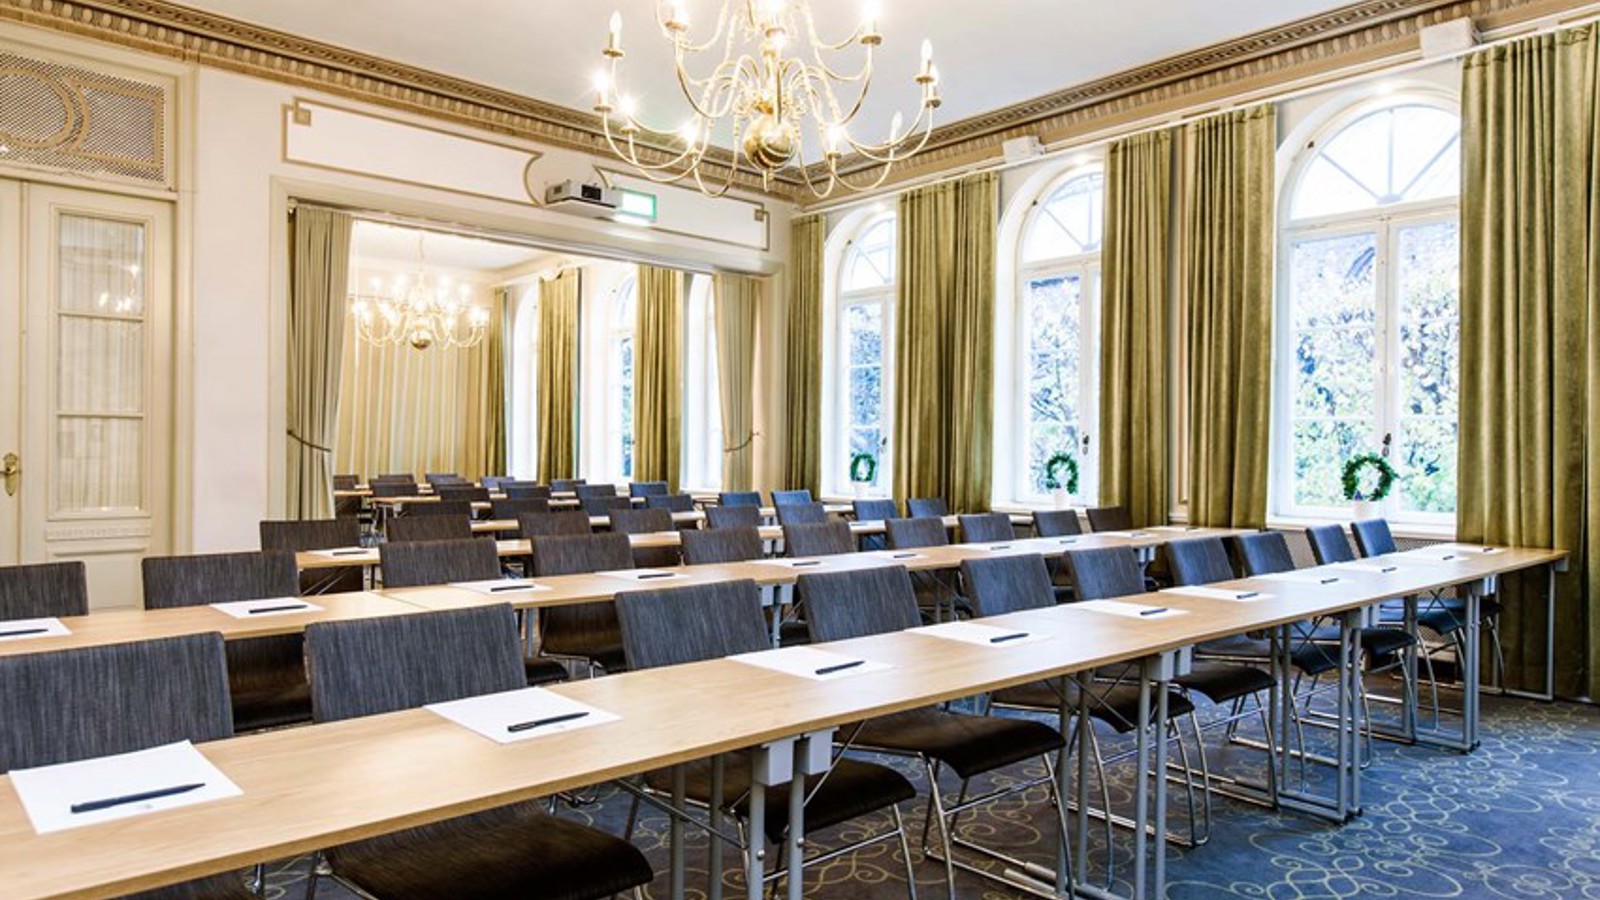 Conference room with lined up chairs, tables gold details and large windows